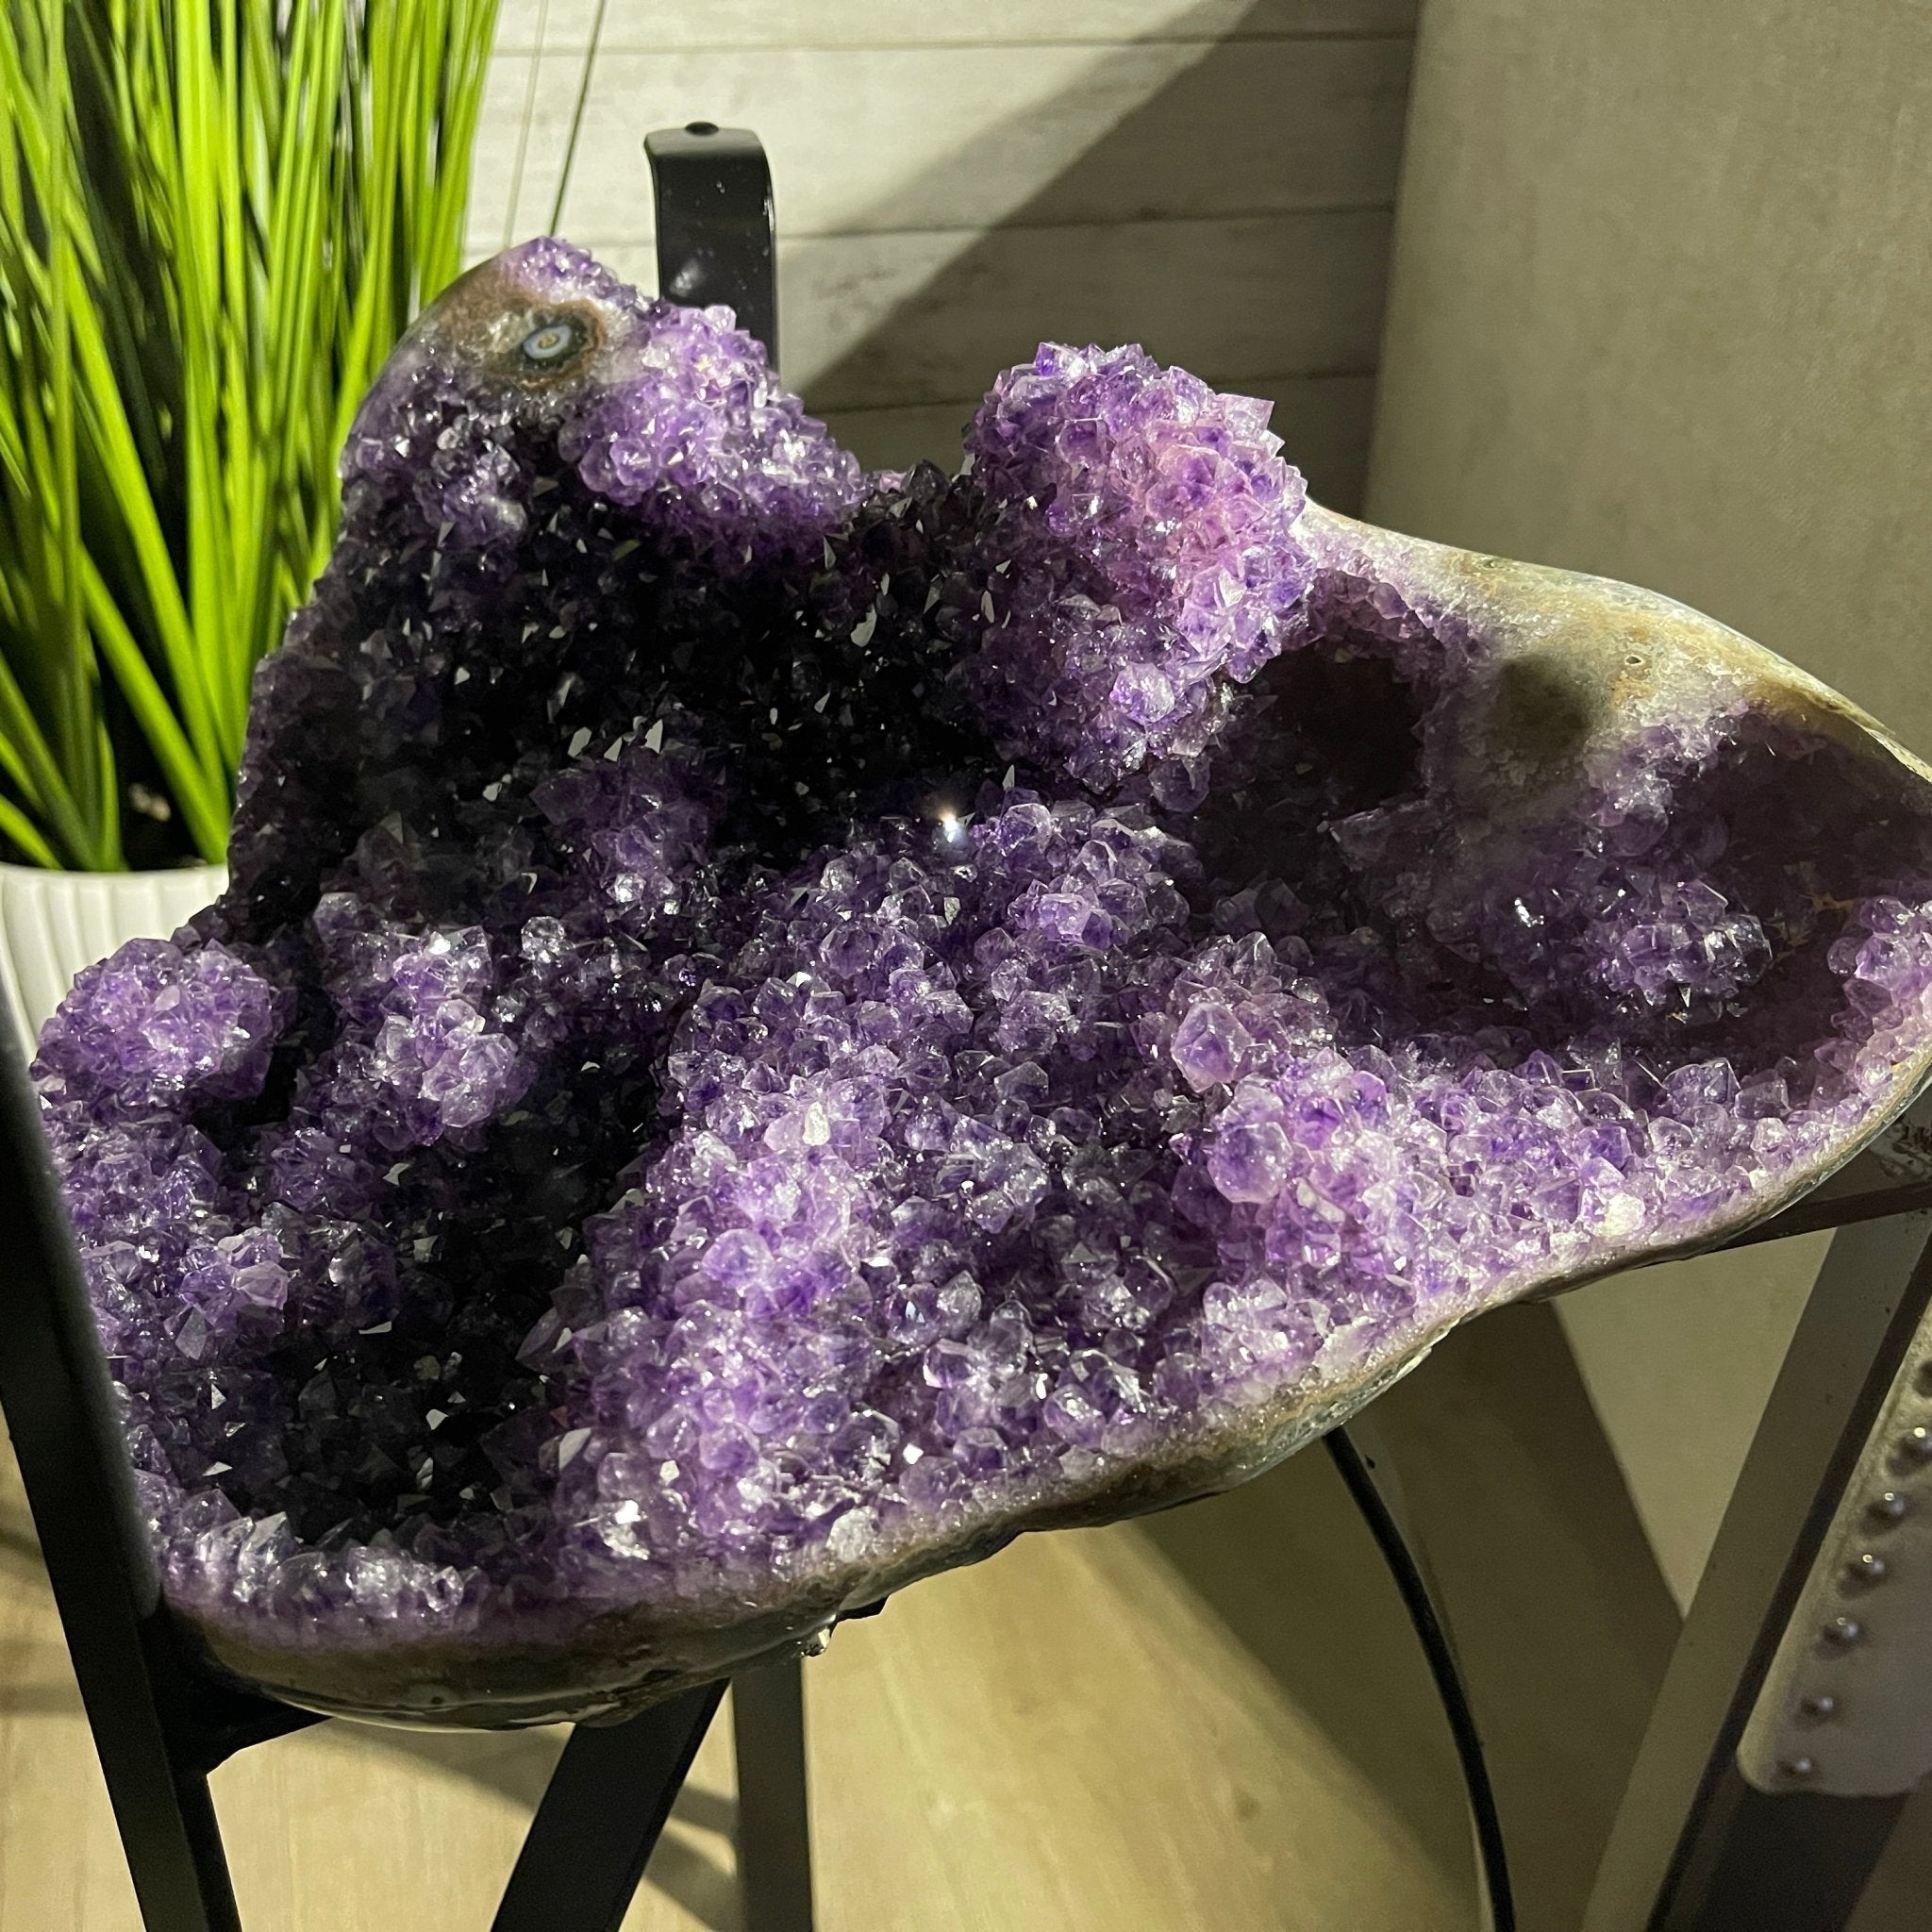 Extra Quality Uruguayan Amethyst Geode Side Table, 31.5 lbs, 23.75" tall on a metal base #1384-0017 by Brazil Gems - Brazil GemsBrazil GemsExtra Quality Uruguayan Amethyst Geode Side Table, 31.5 lbs, 23.75" tall on a metal base #1384-0017 by Brazil GemsTables: Side1384-0017